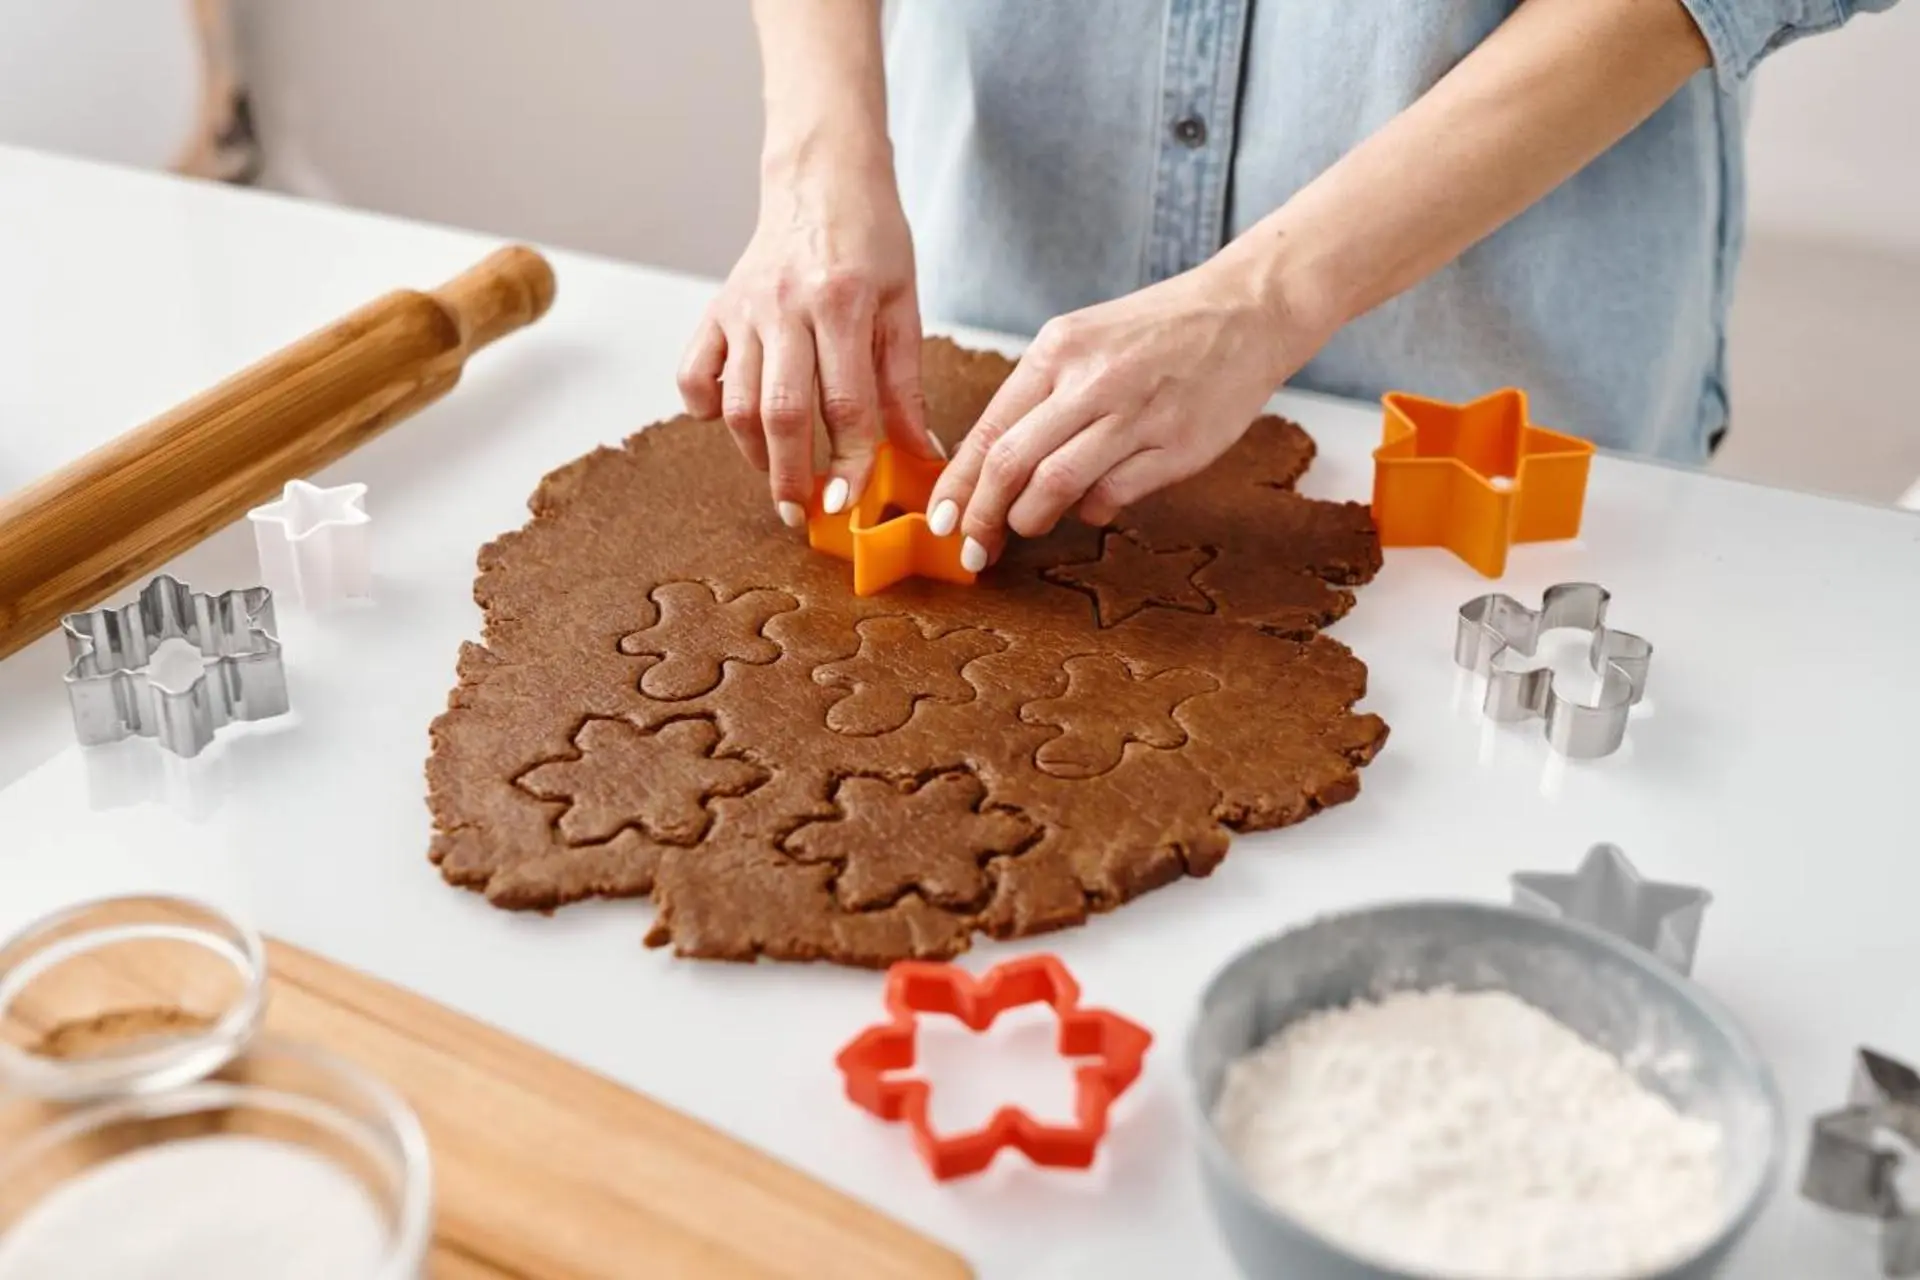 Don’t let weather ruin your holiday baking with these sweet tips